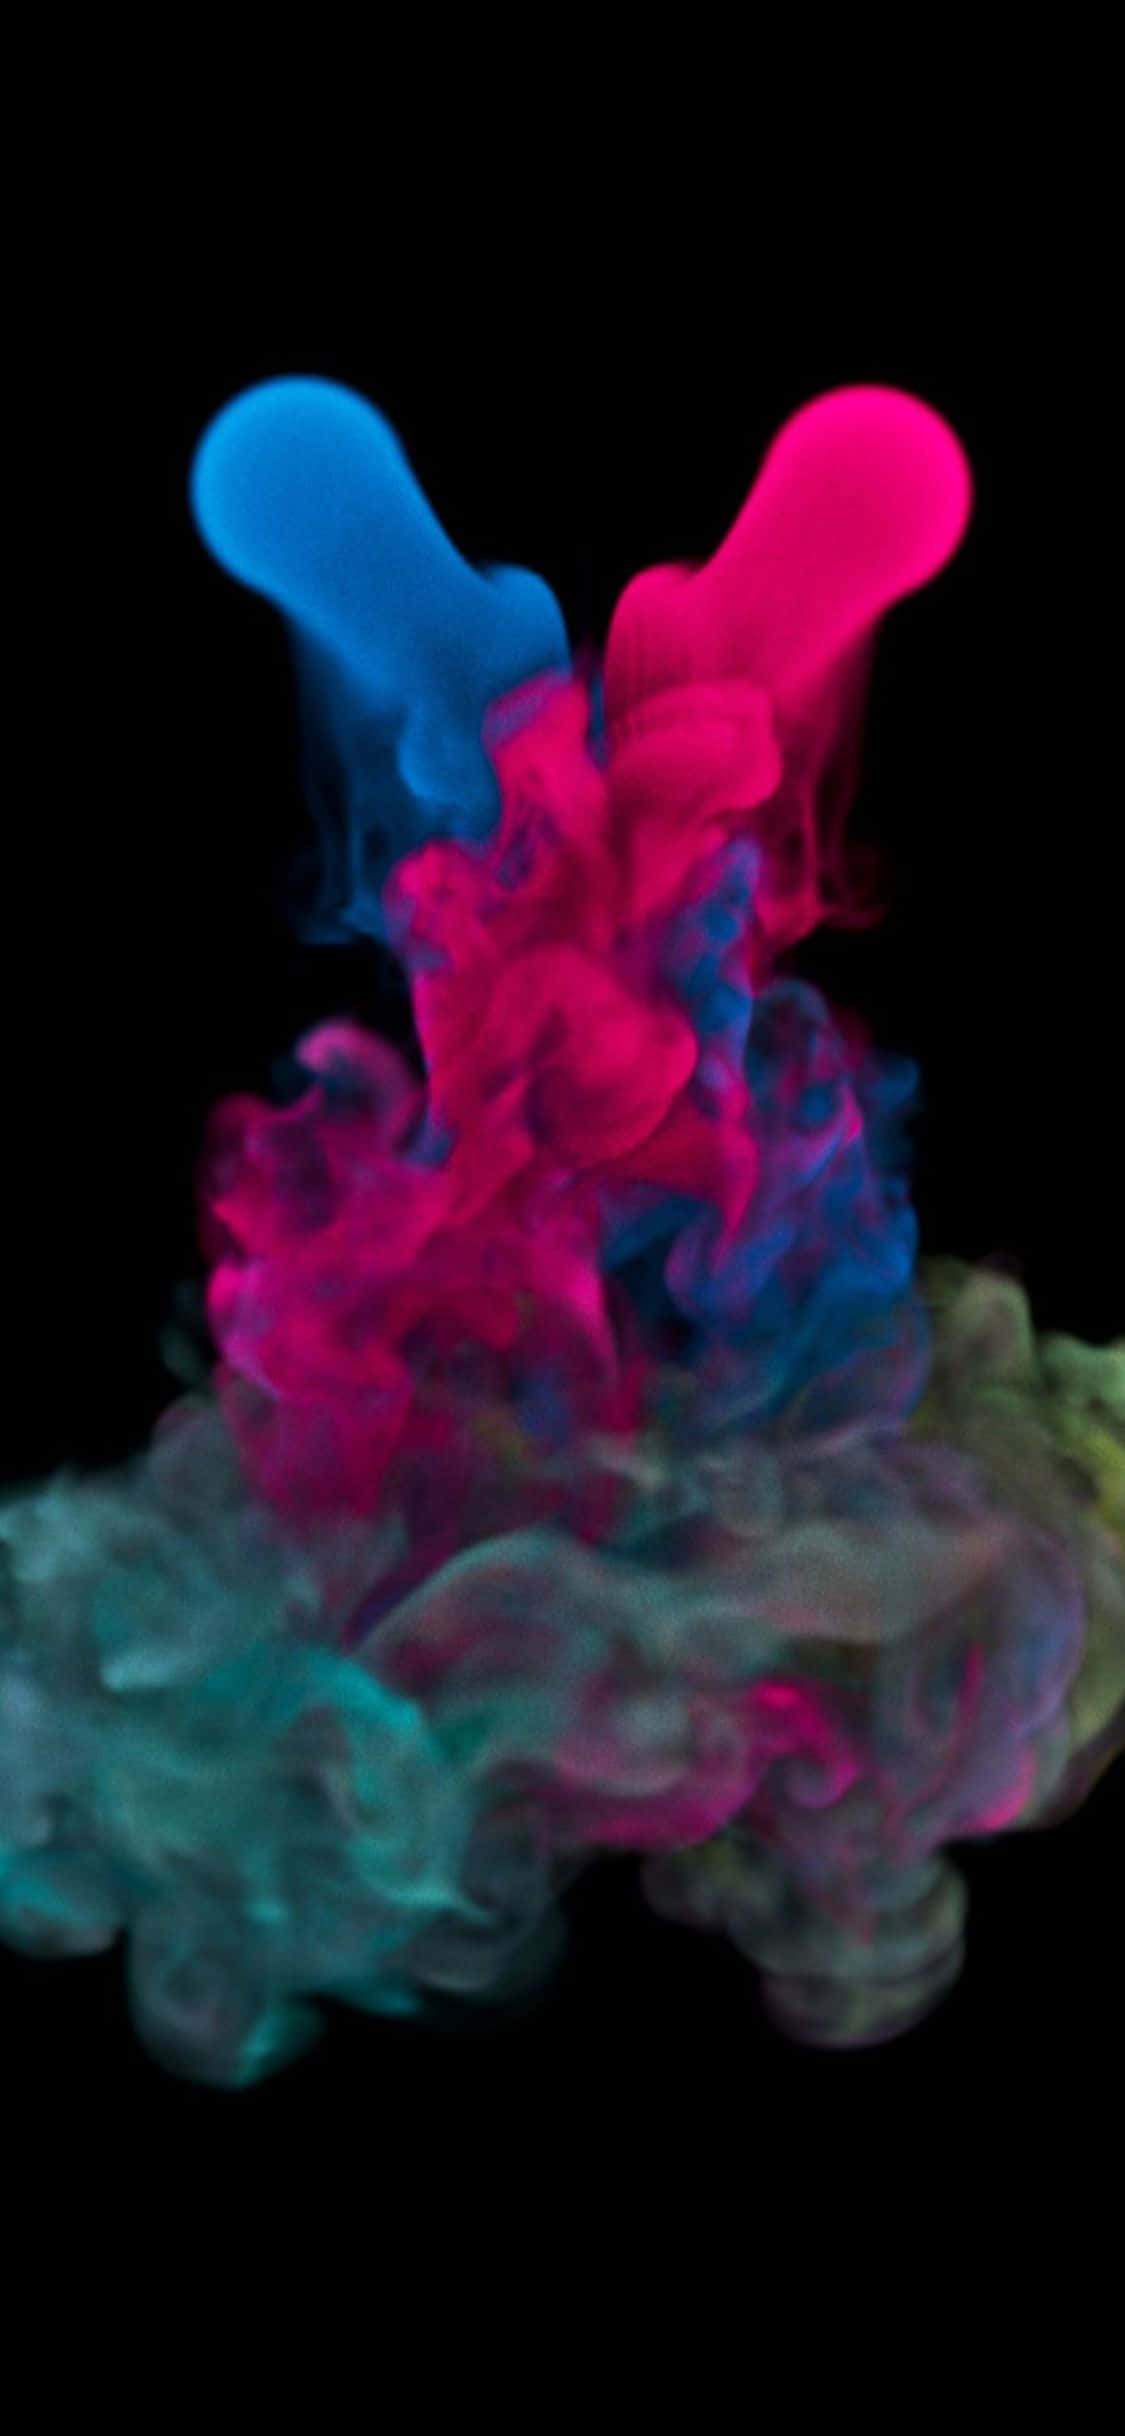 A Colorful Smoke Is Floating In The Air